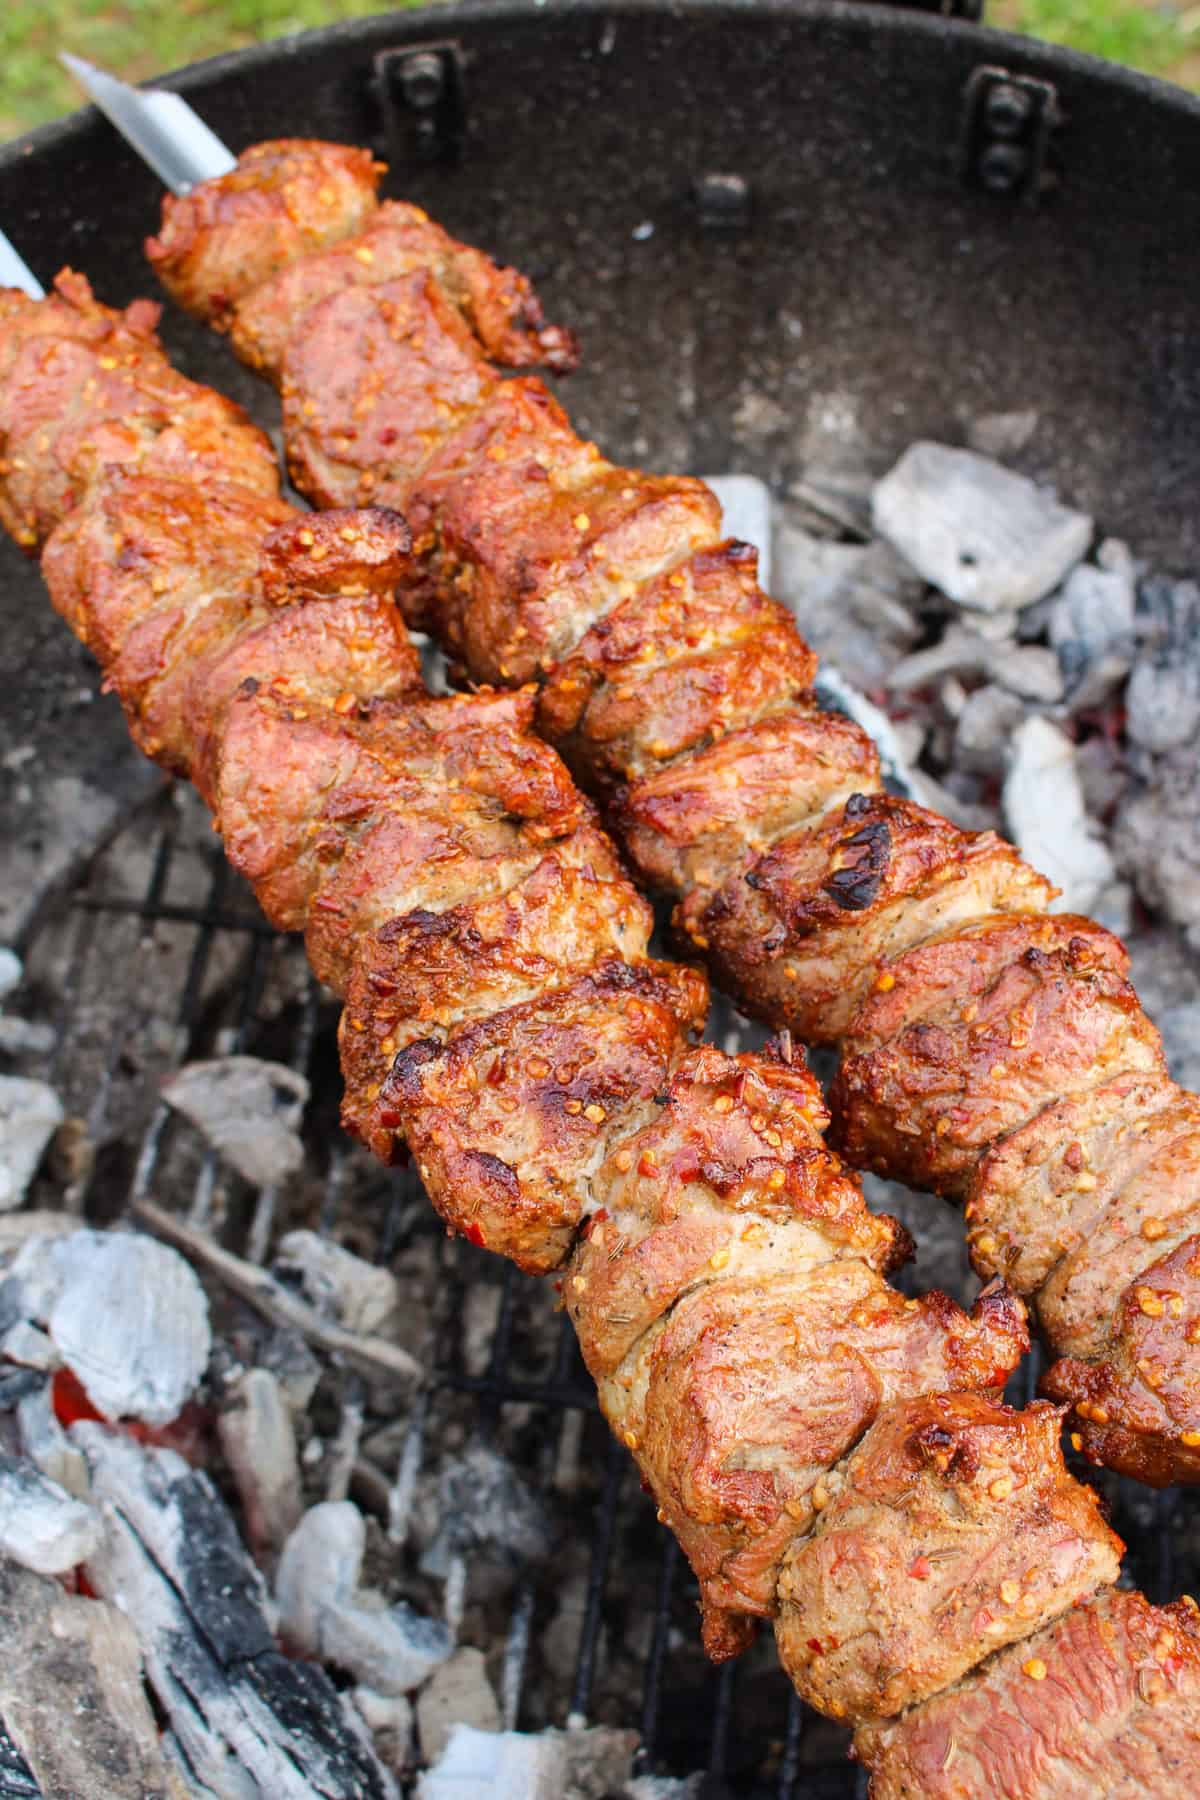 Spiced Lamb Kebabs with Mint Chimichurri cooking and started to char around the edges